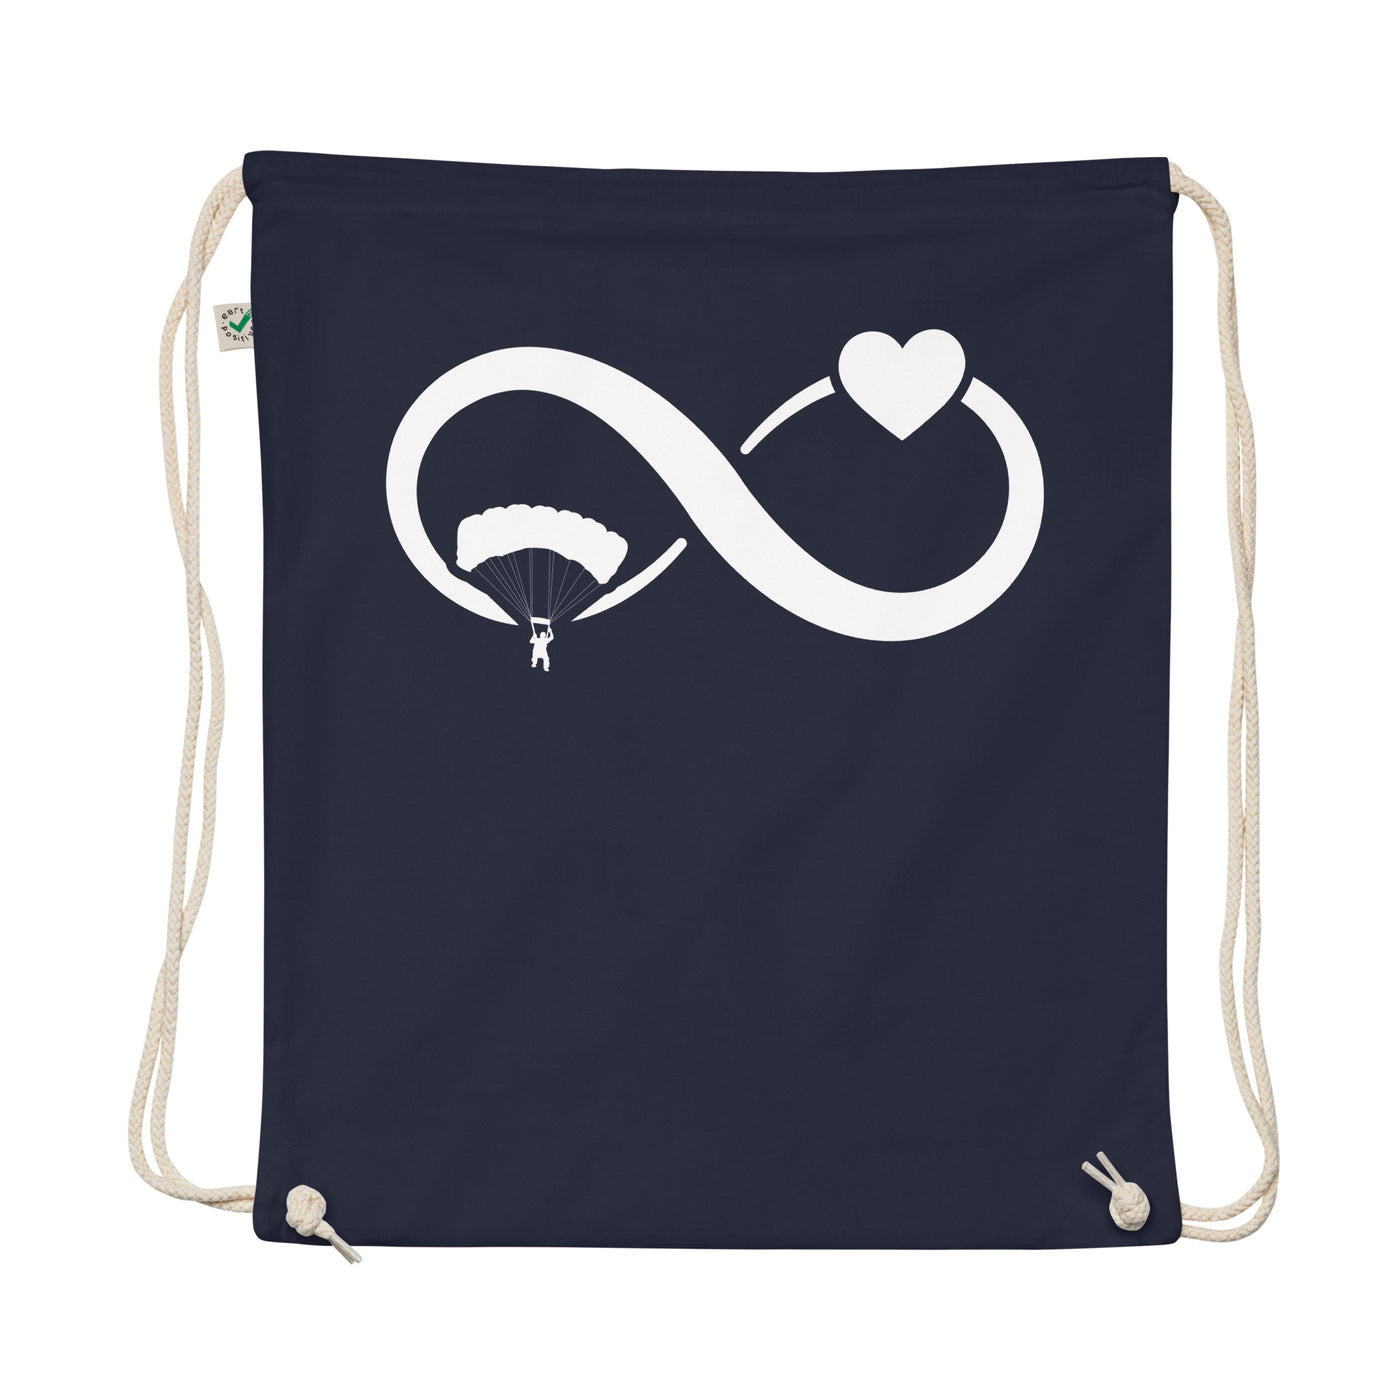 Infinity Heart And Paragliding - Organic Turnbeutel berge